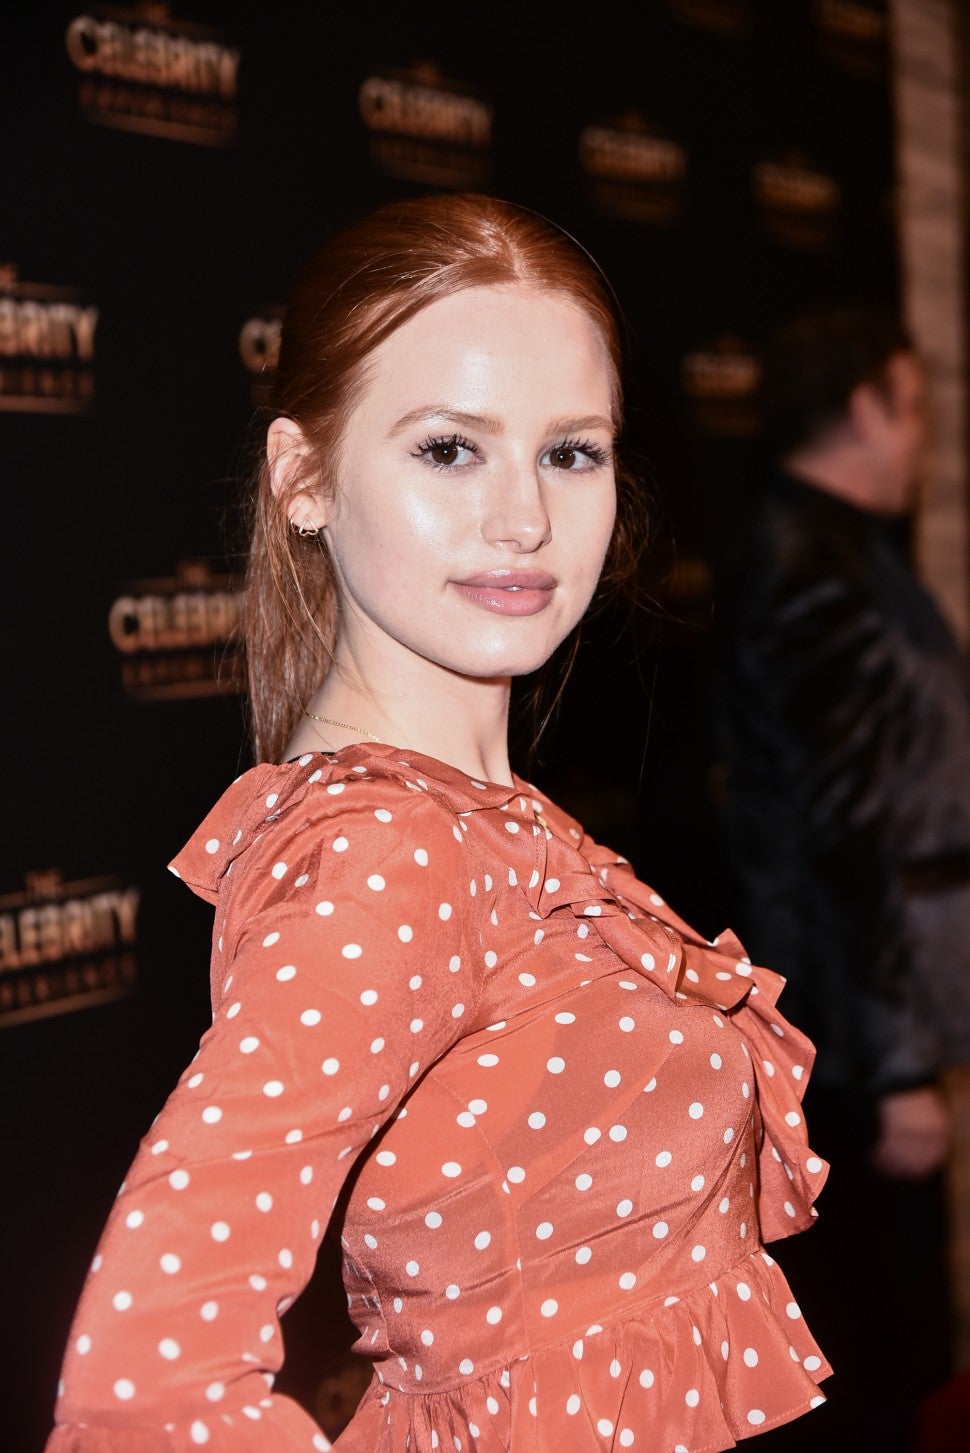 MADELAINE PETSCH stopped by The Celebrity Experience at the Universal Hilton